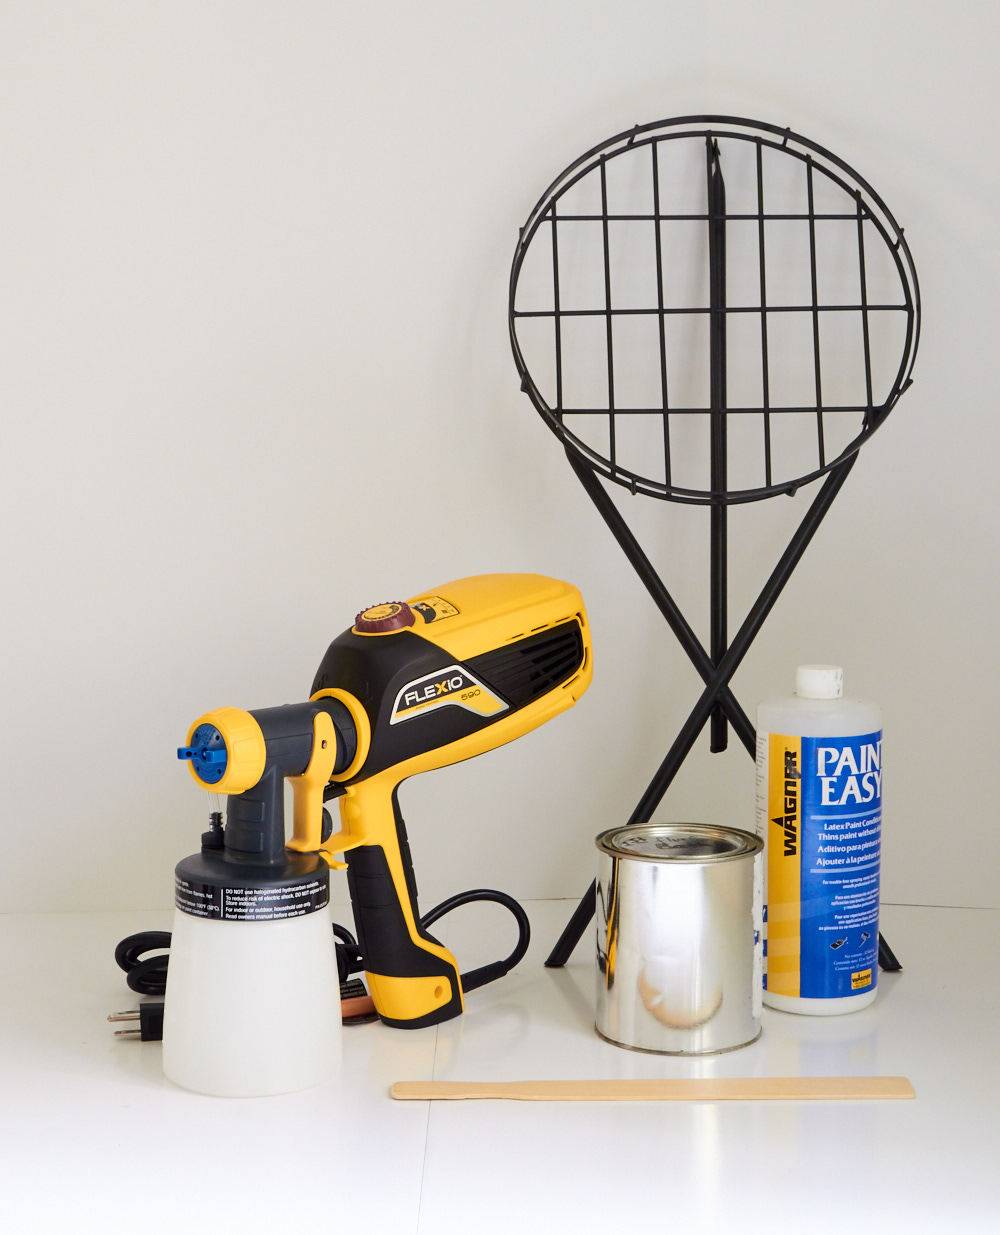 A tennis racket, drill machine, metal box and paint bottle are standing on the floor.